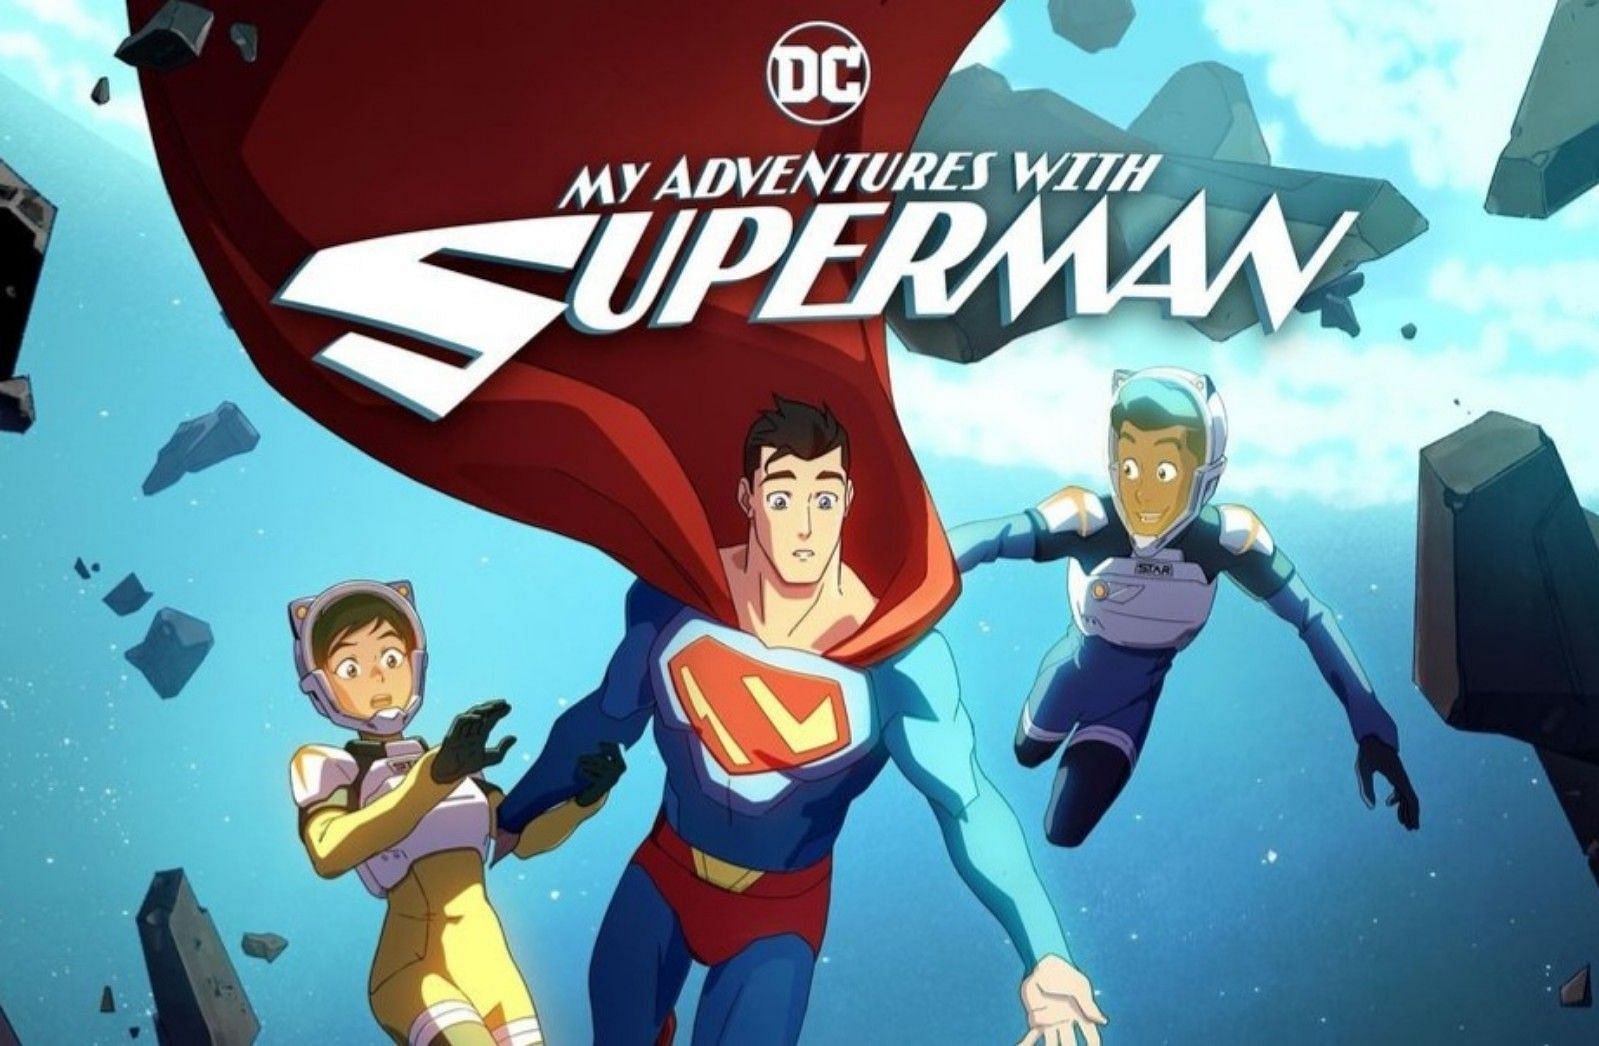 Poster for My Adventures with Superman season 2 (Image via @dcofficial on Instagram)